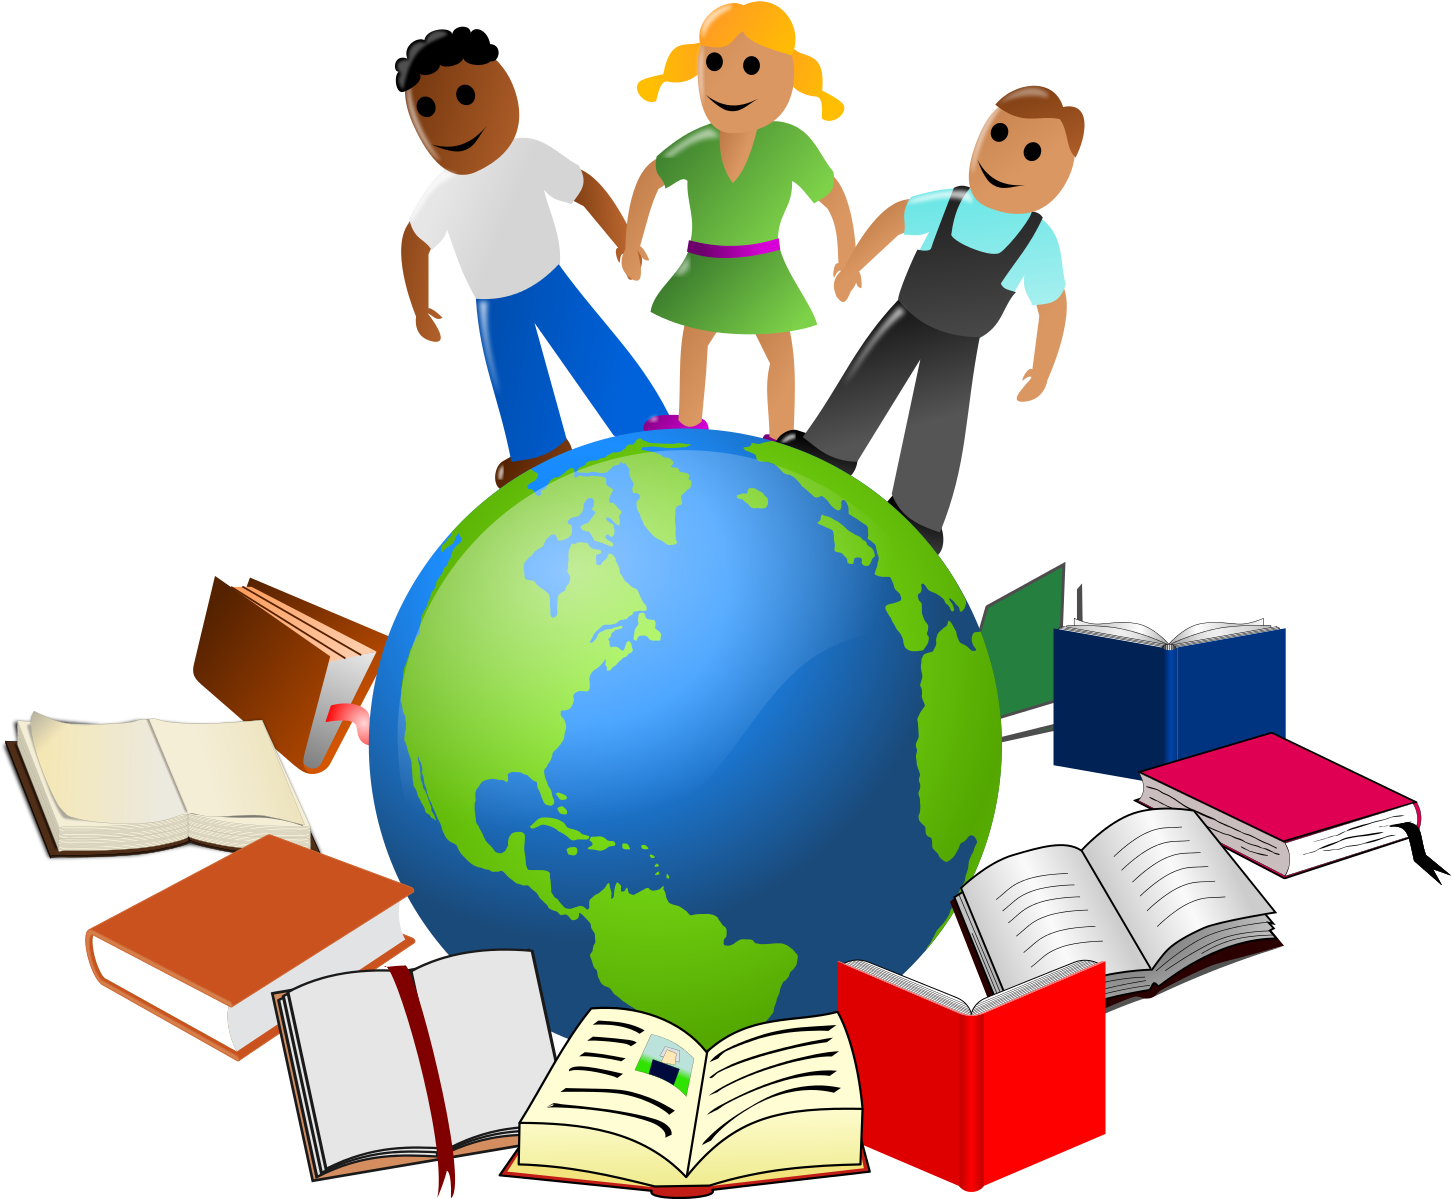 A Group Of Children Standing On Top Of A Globe Surrounded By Books